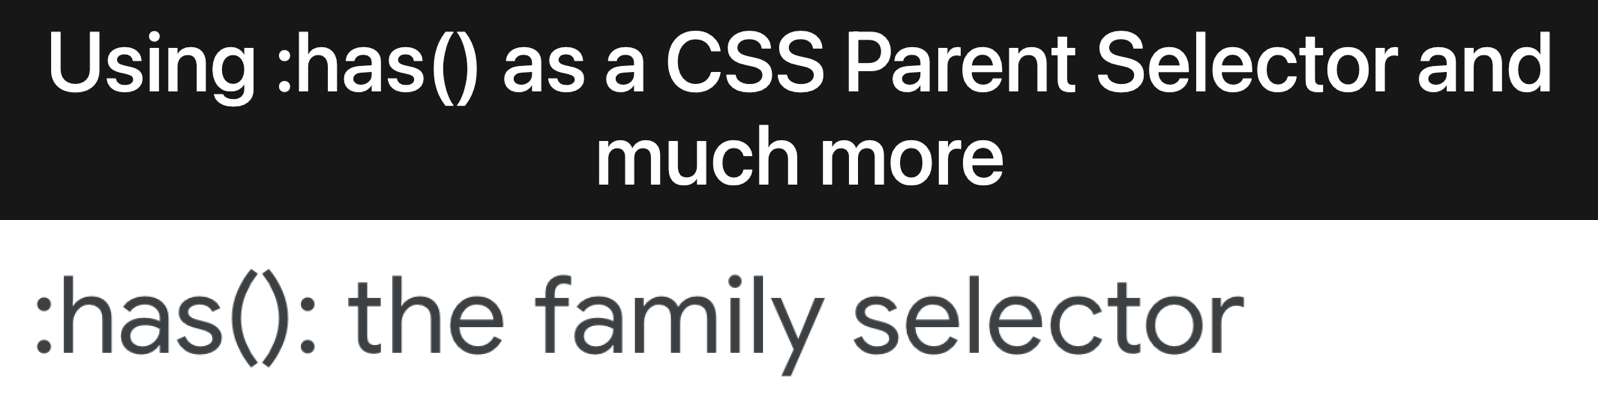 "Using :has() as a CSS Parent Selector and much more" ":has(): the family selector"